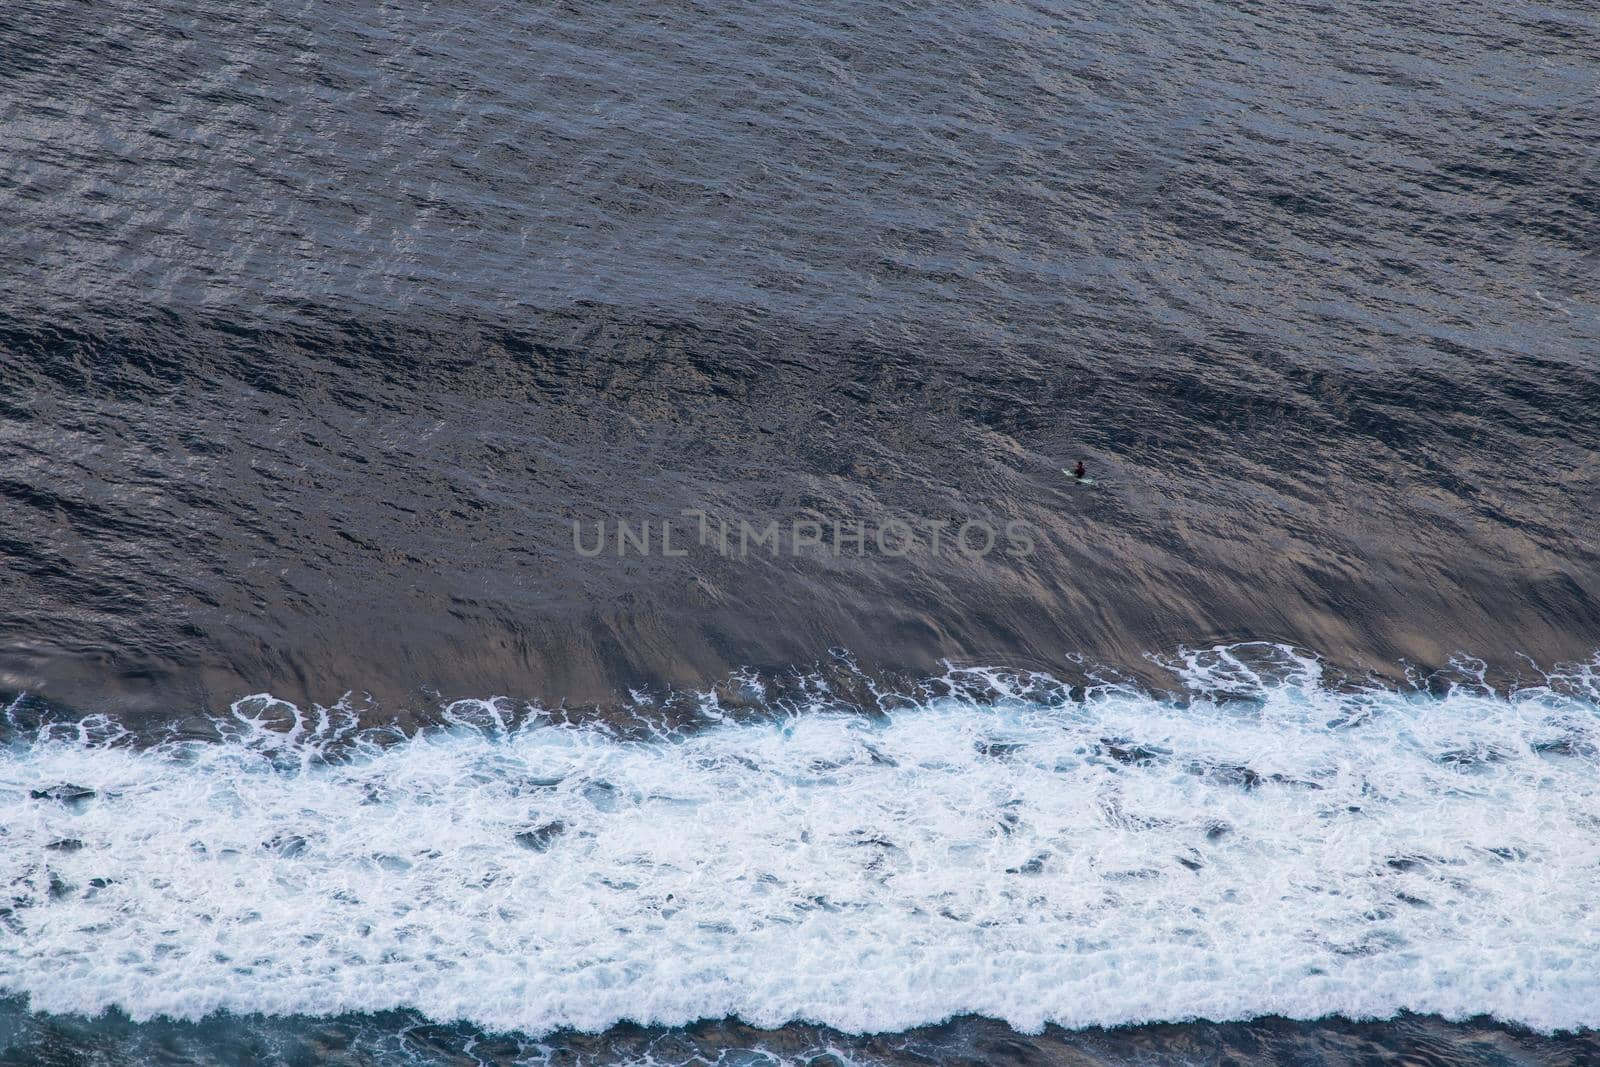 Aerial view of ocean with wave and lonely surfer in blue water. Atlantic ocean.